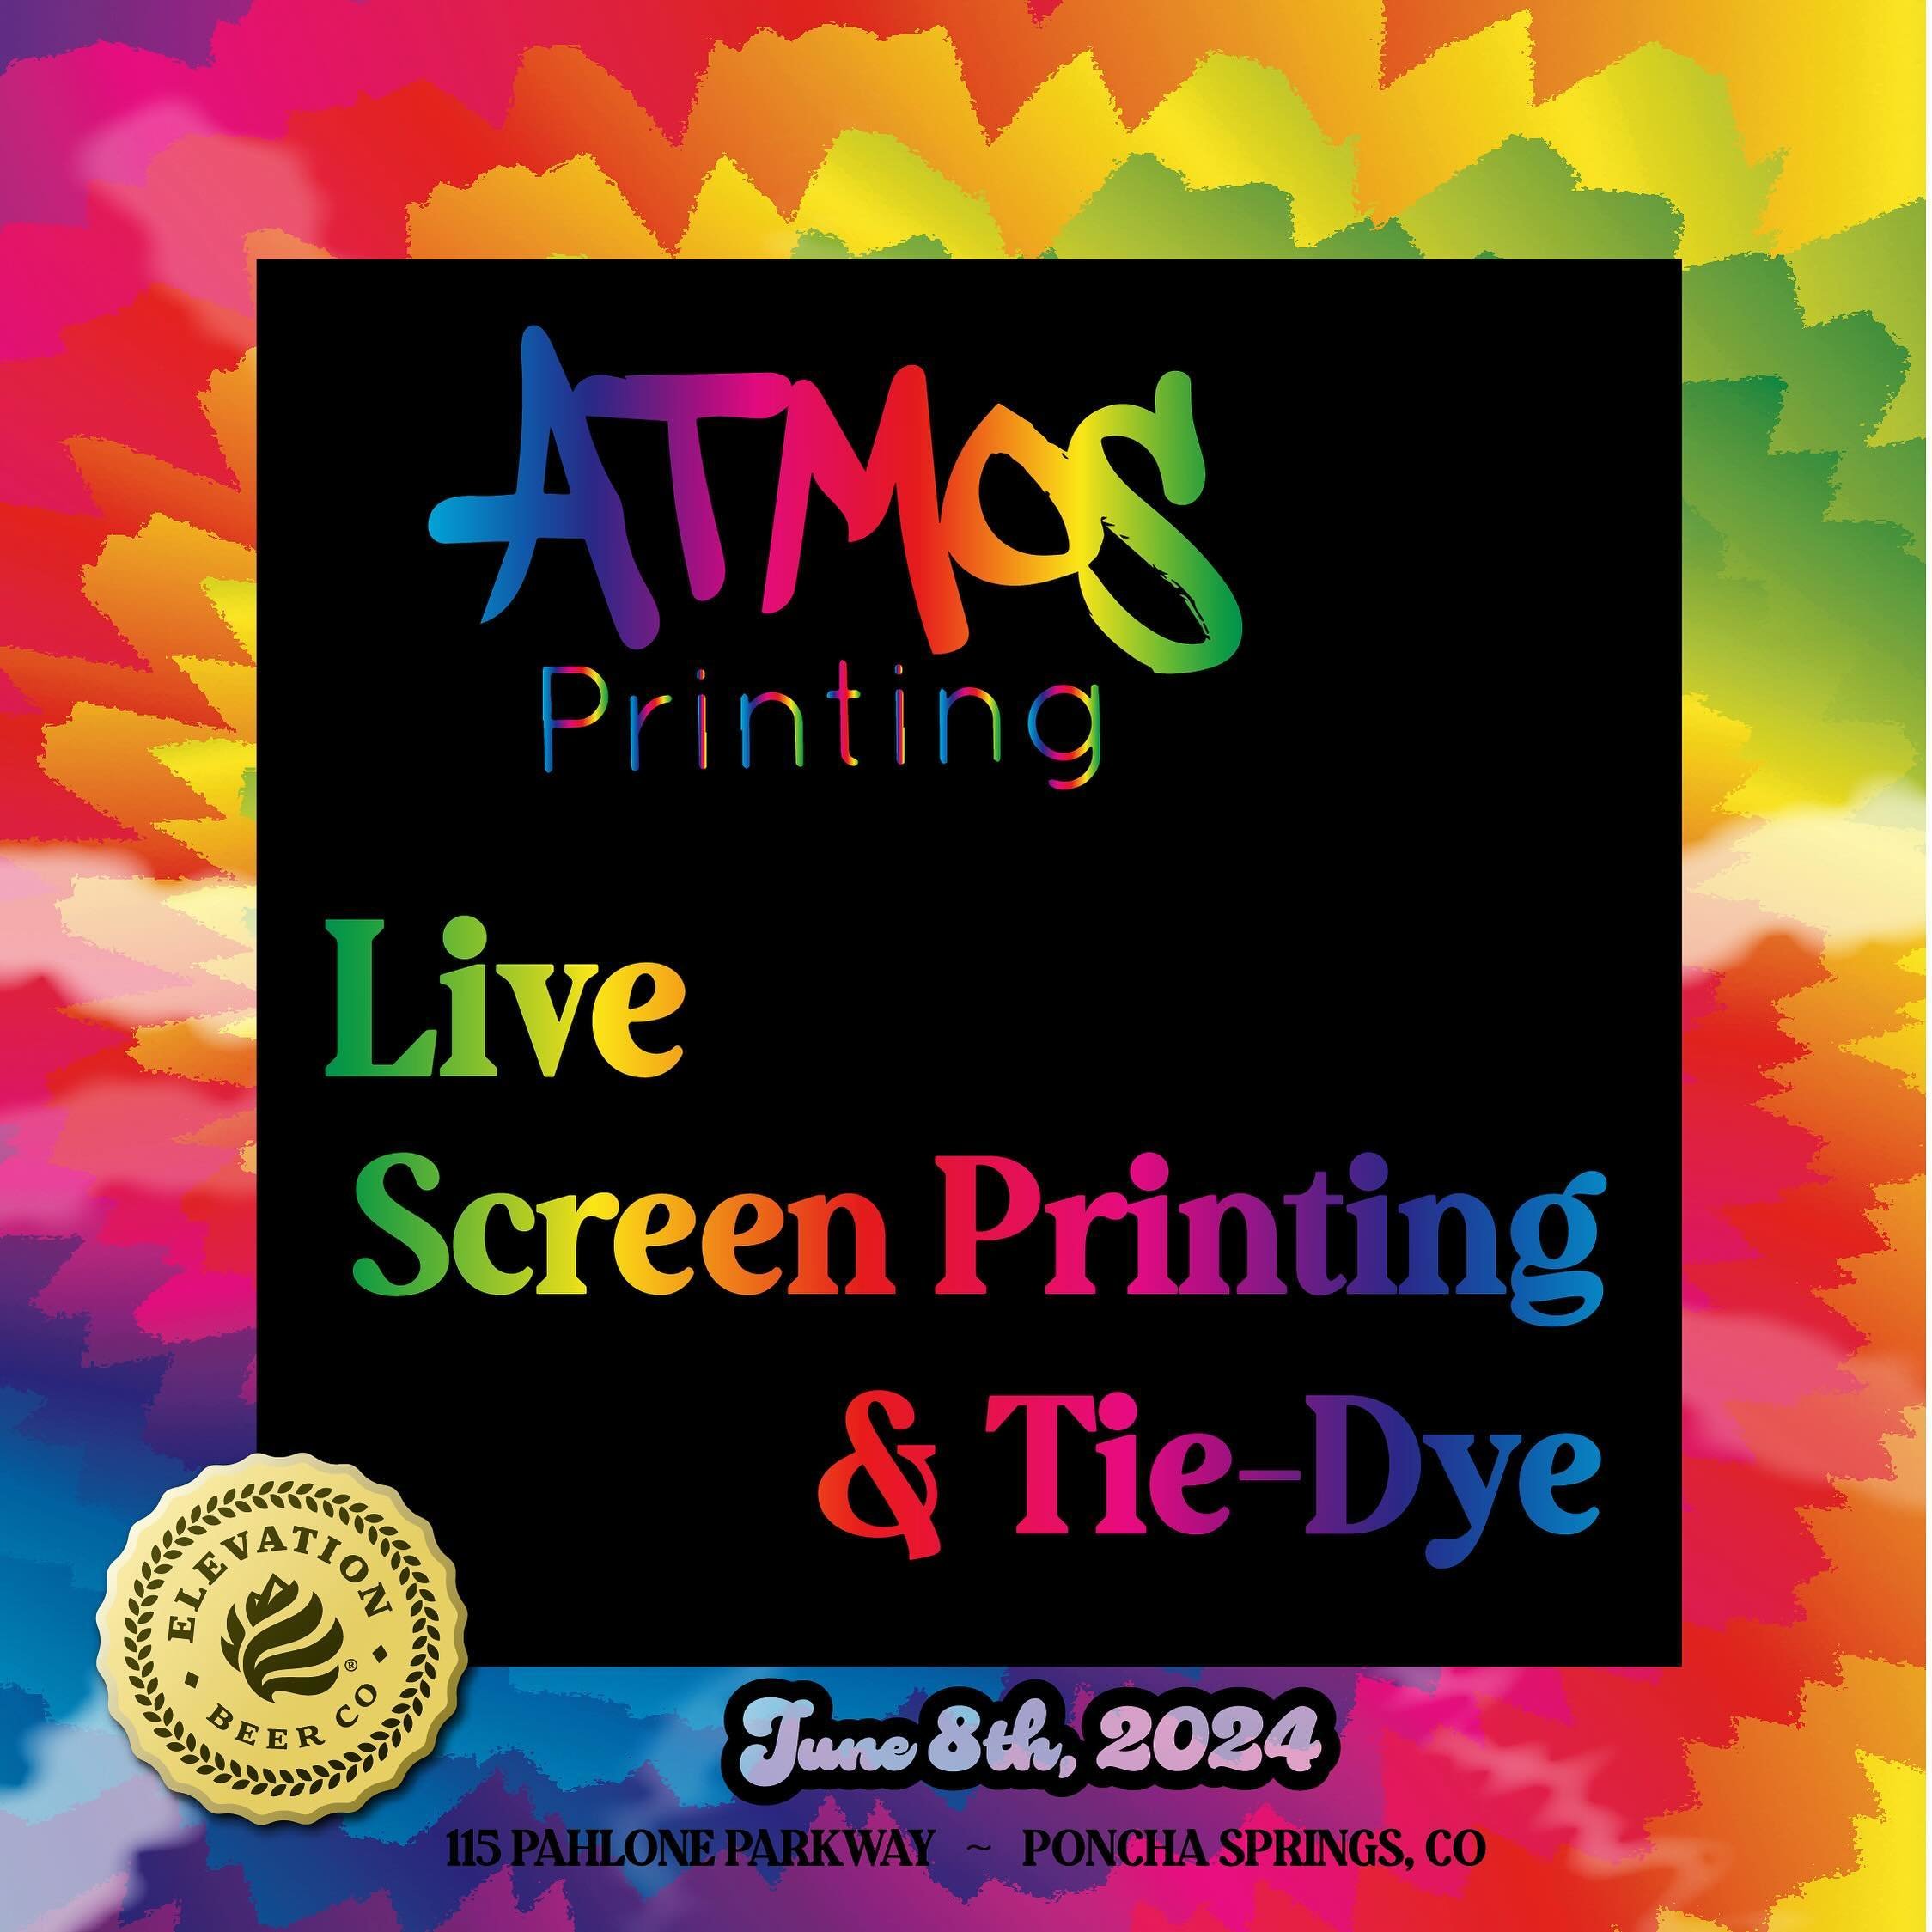 Don&rsquo;t own any tie-dye? Don&rsquo;t worry about it, man. @atmosprinting will be doing live screen printing and tie-dyeing while you let your freak flag fly. ✌️